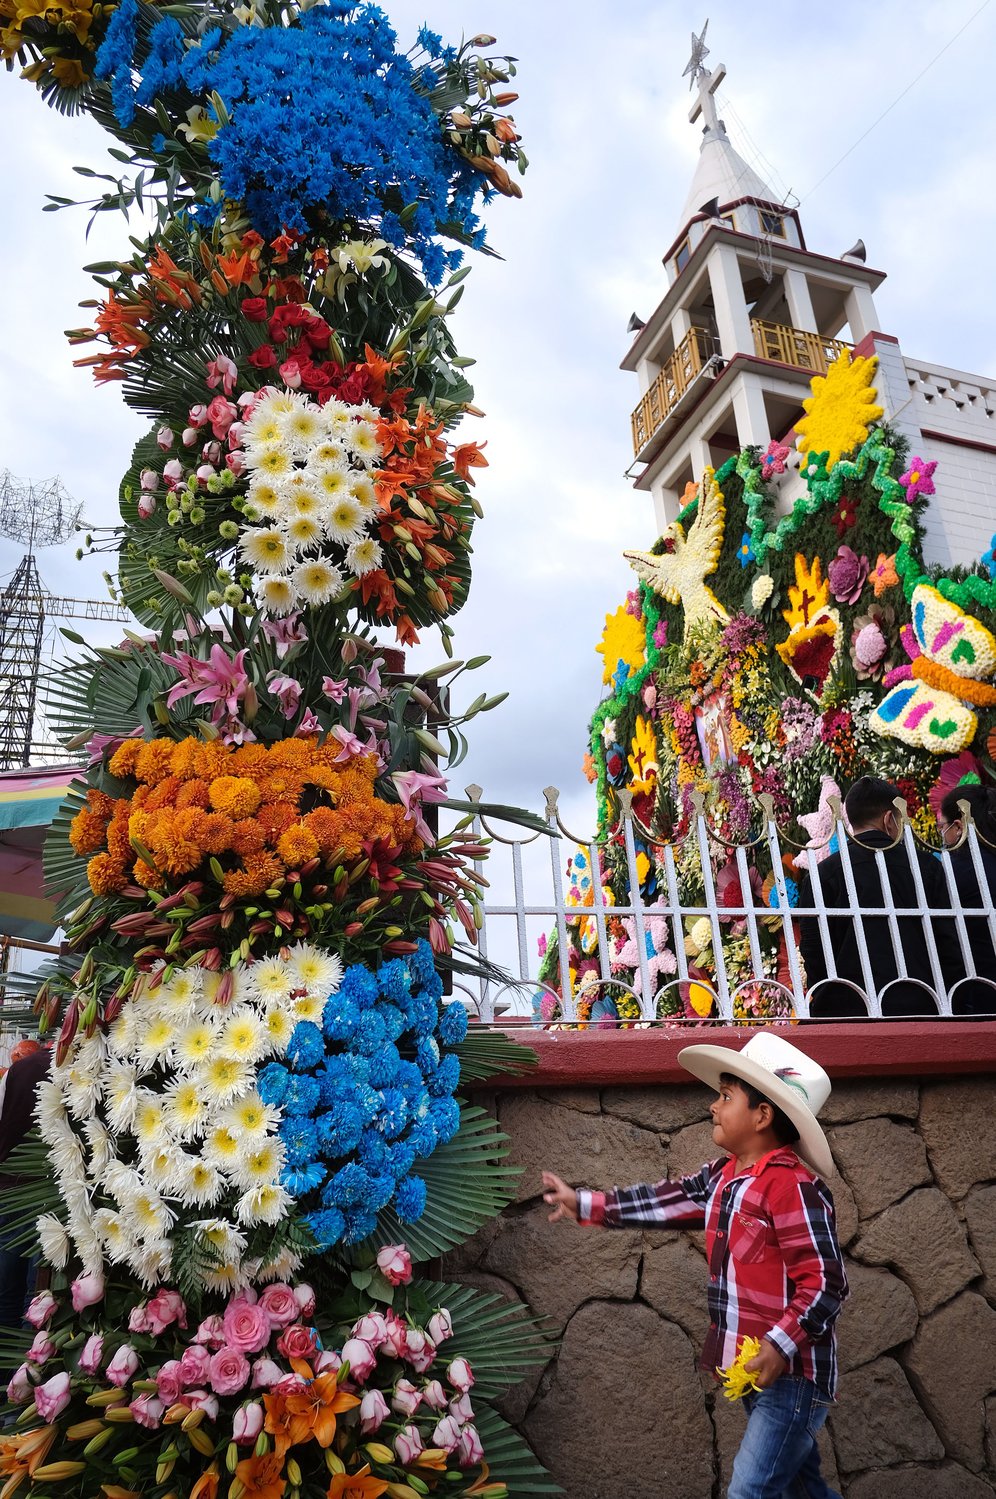 A boy reaches to touch floral arrangements outside Santa Ana Ixtlahuatzingo Catholic Church in Tenancingo, Mexico, July 26, during a celebration on the feast of the church’s patron saint, St. Anne, grandmother of Jesus.